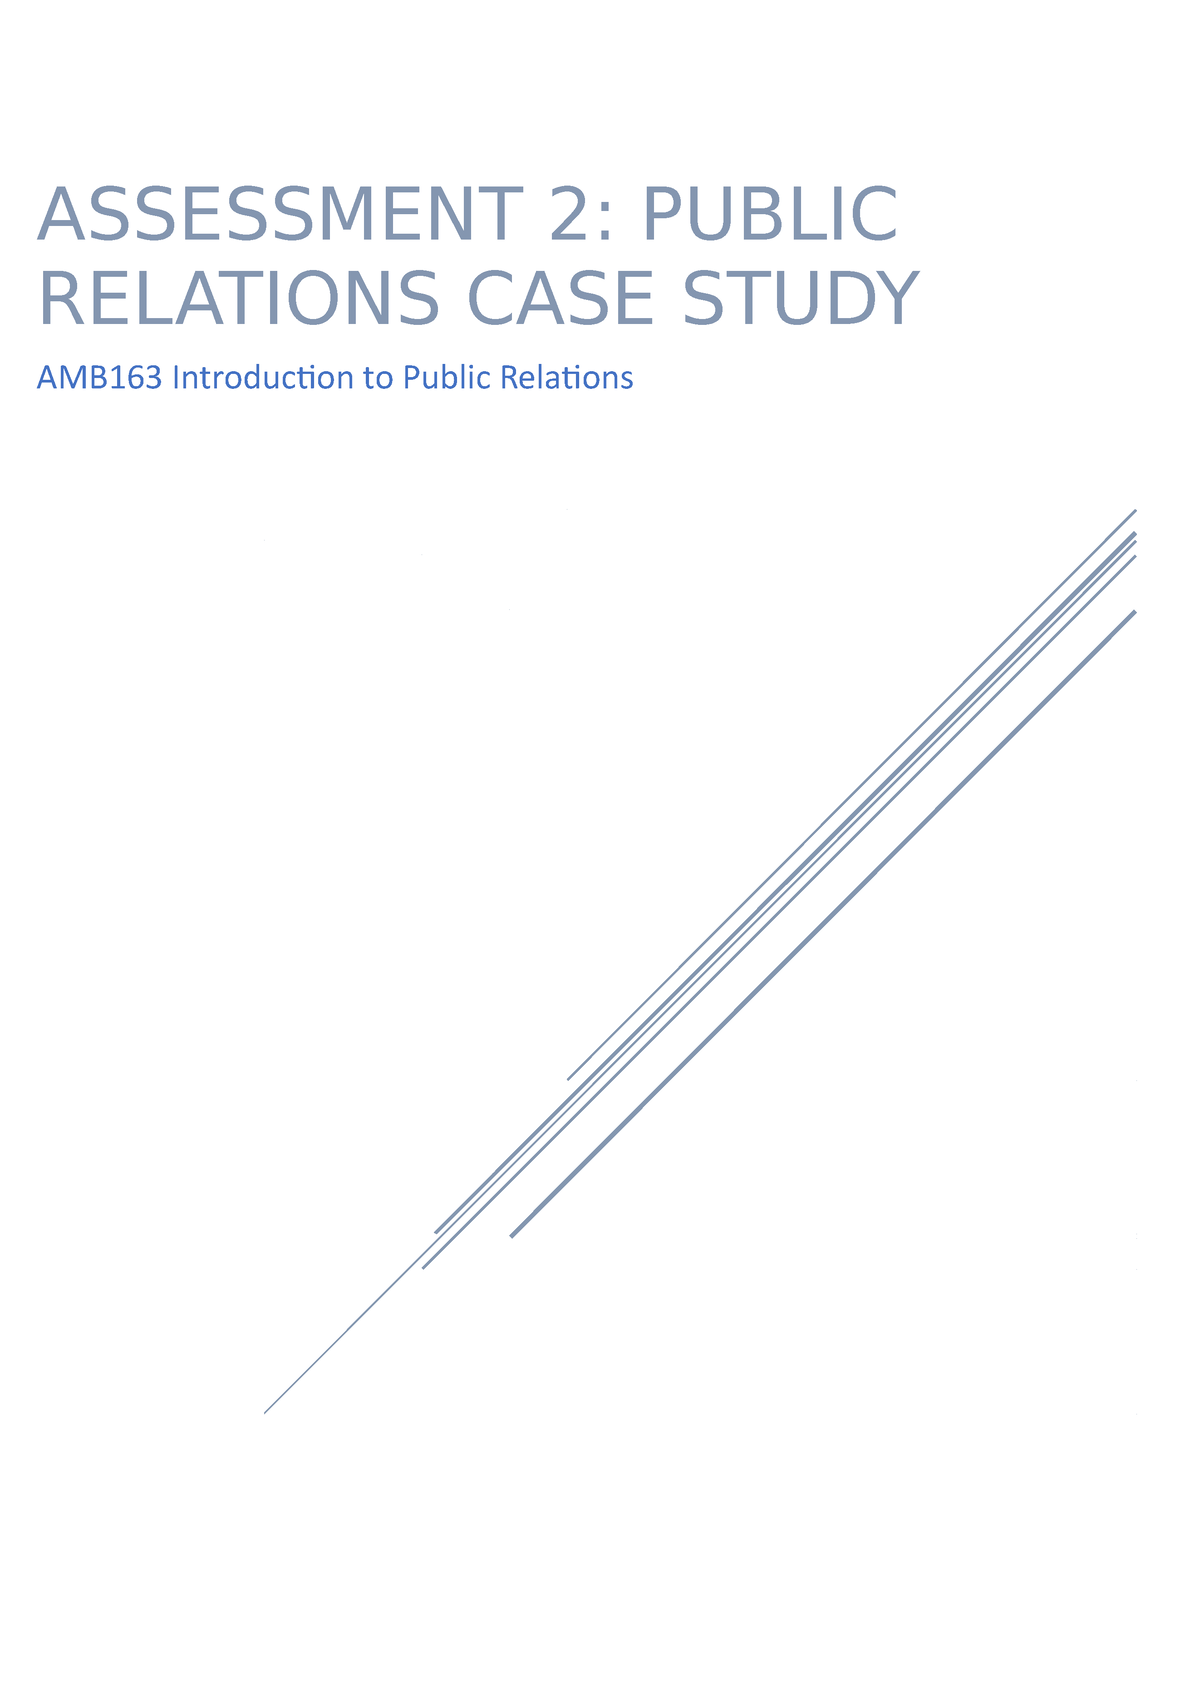 public relations case study research